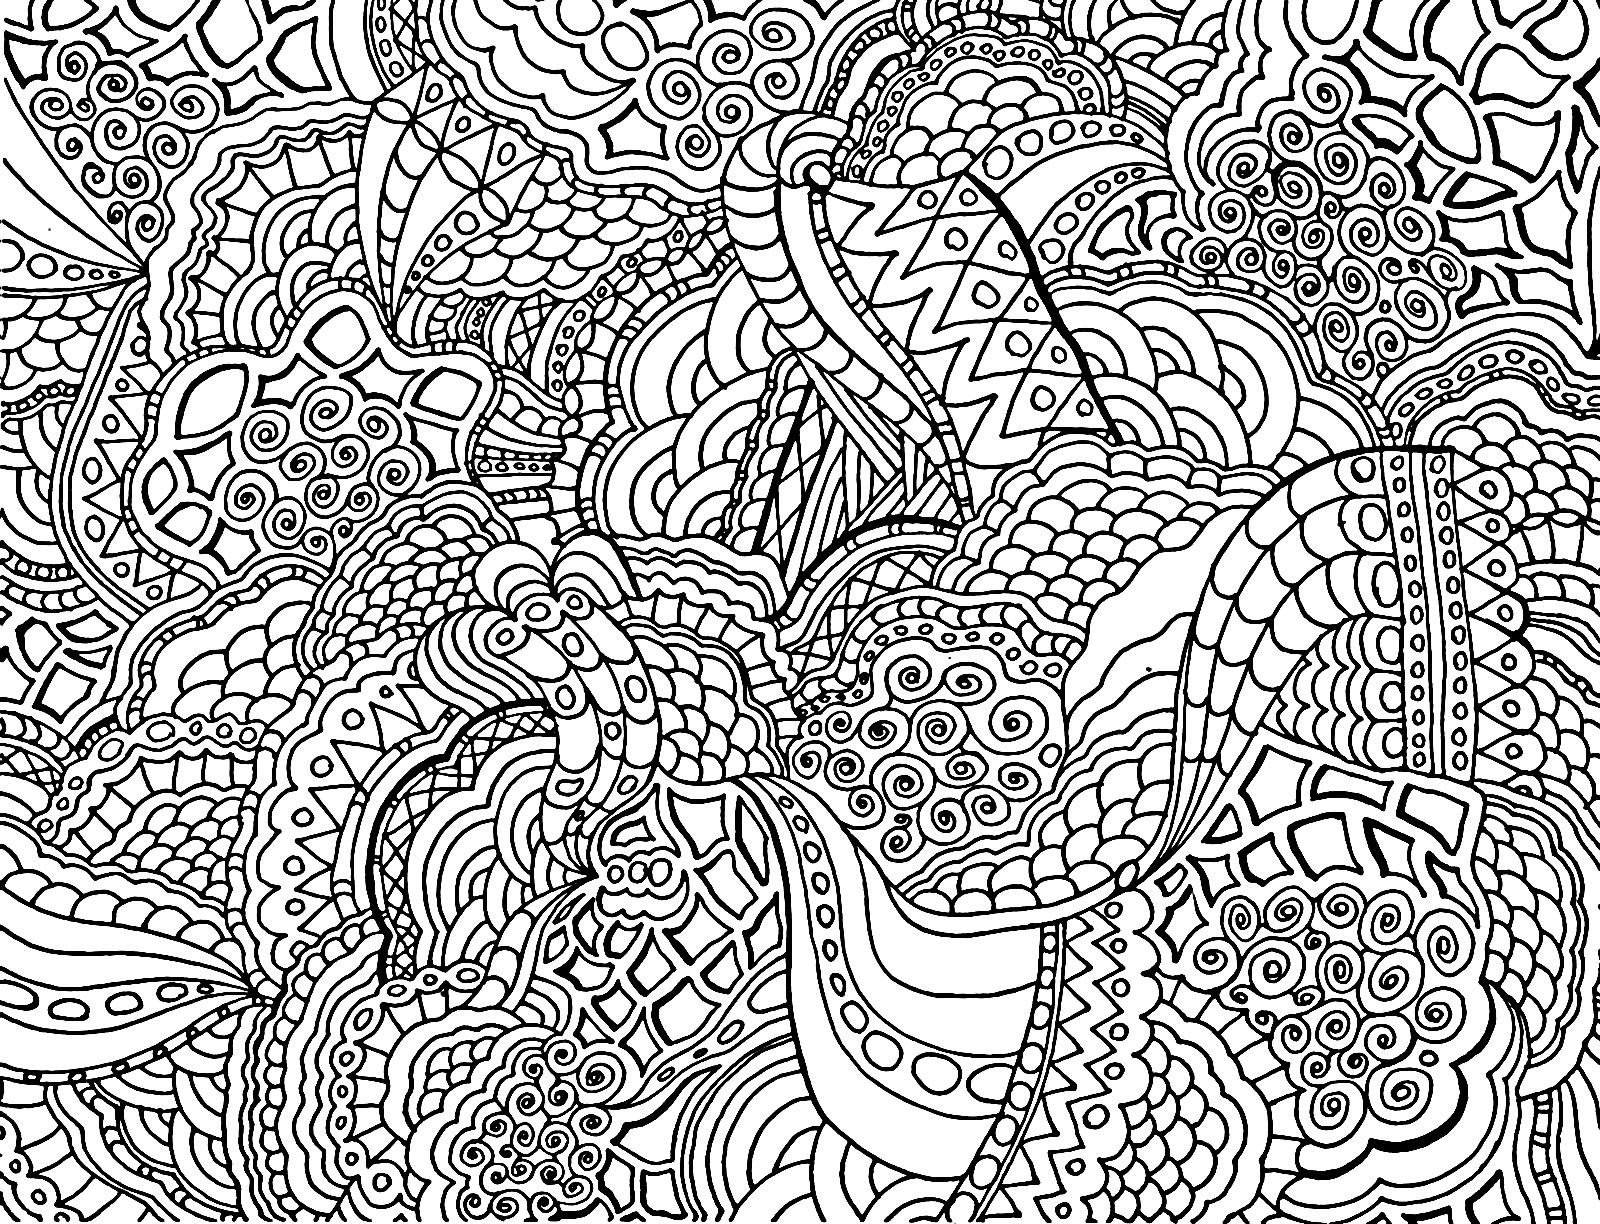 Glamorous patterned coloring book